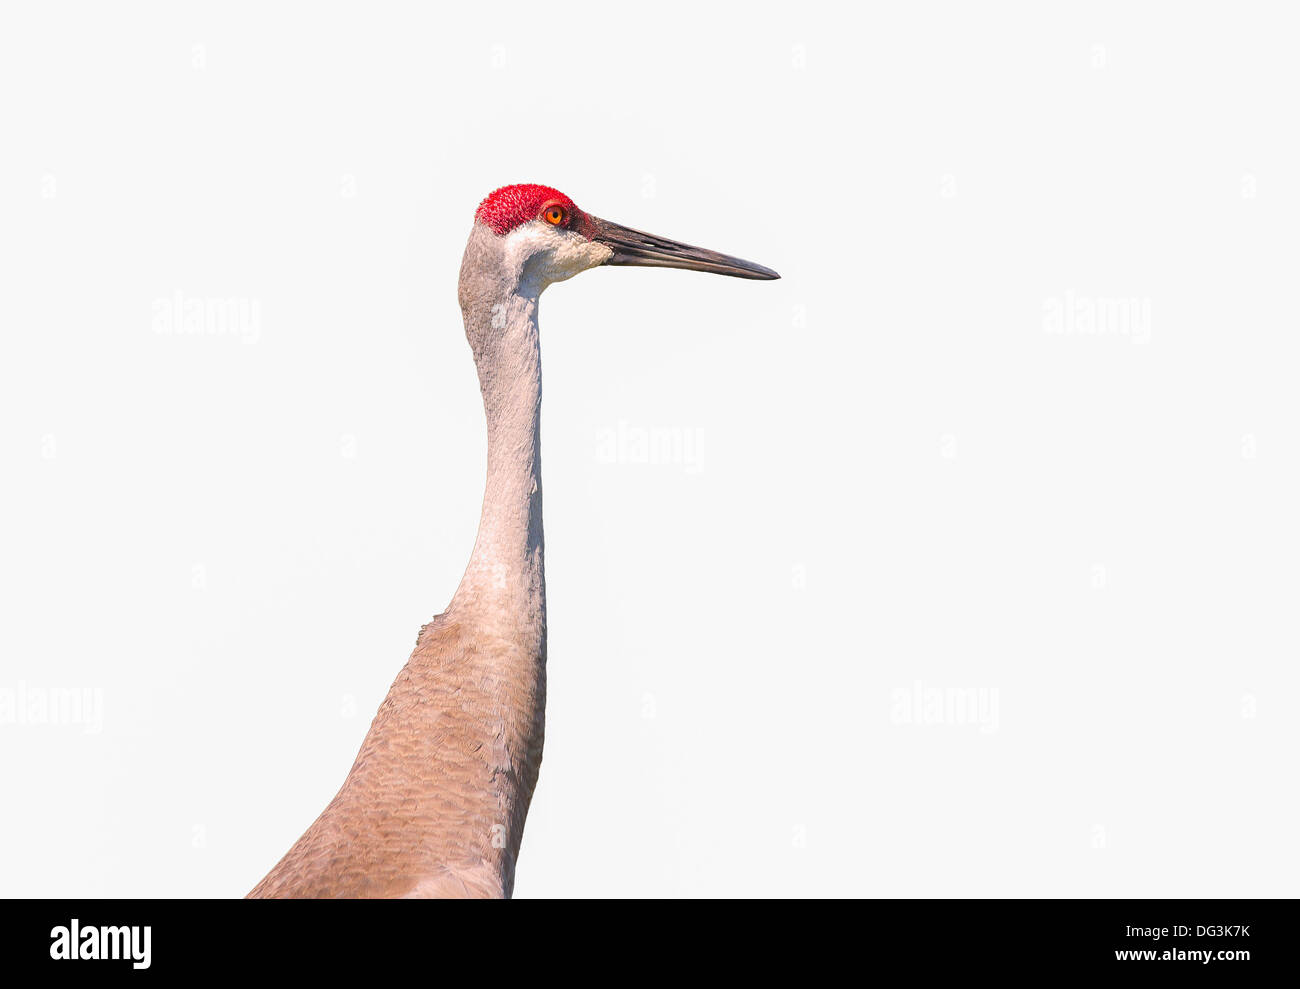 This Sandhill Crane is isolated on a white background and is intently gazing ahead. Stock Photo